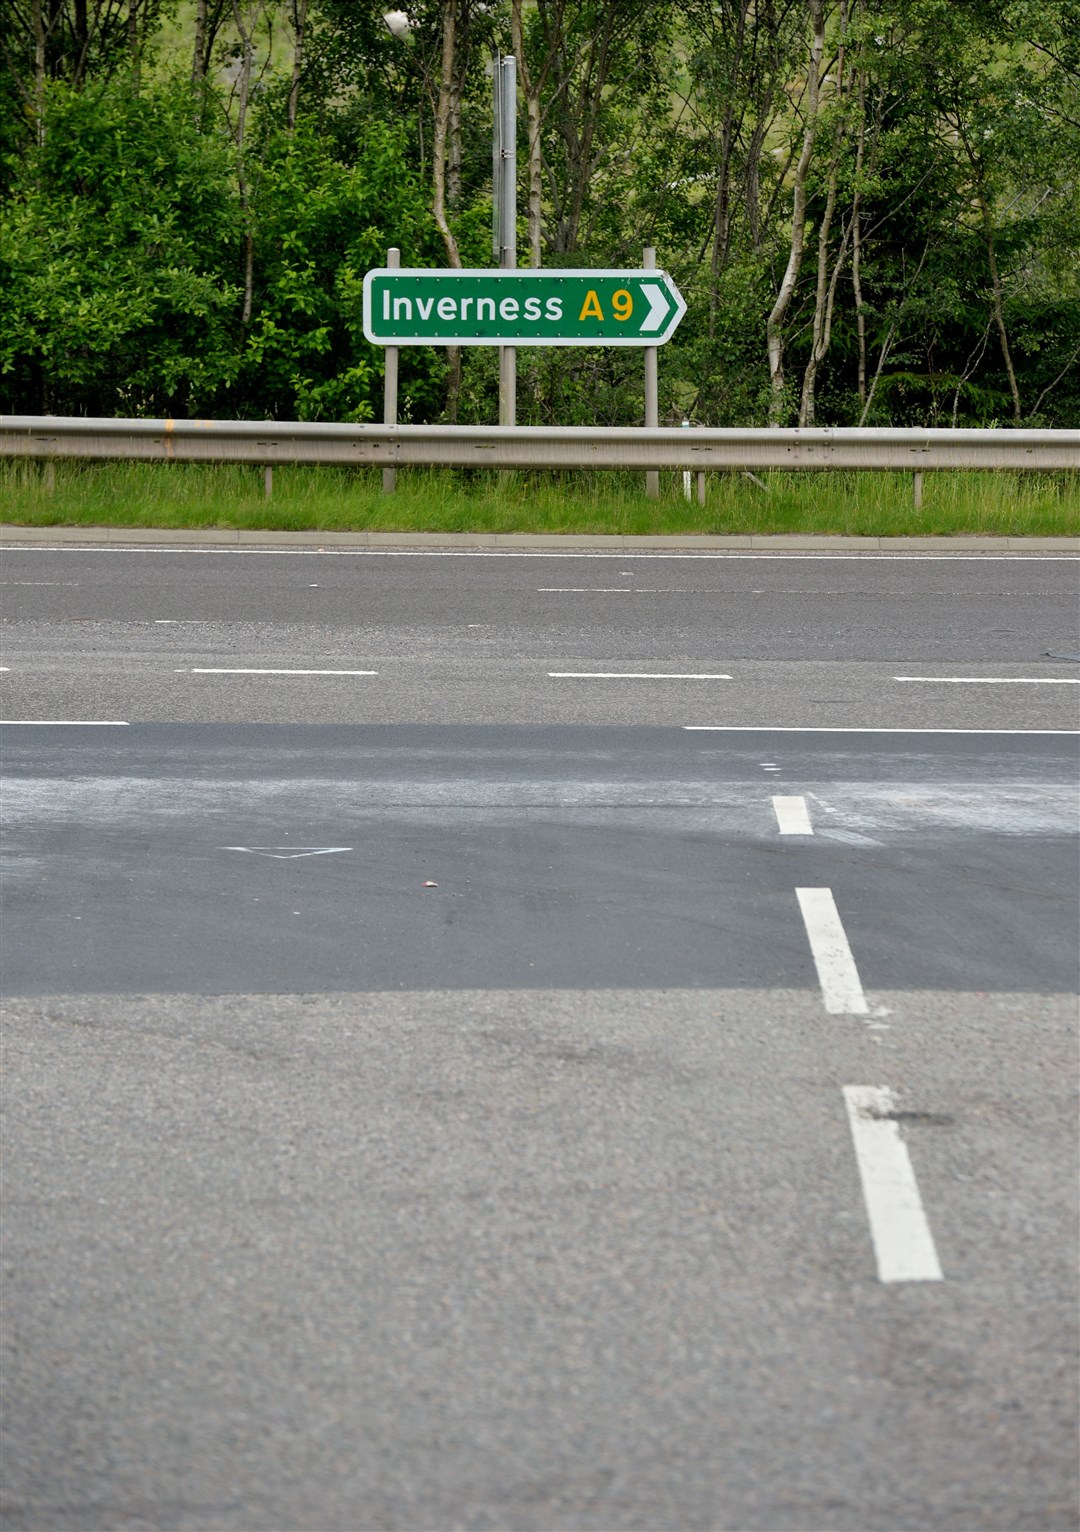 Road works to improve lining on the A9 have started this week.